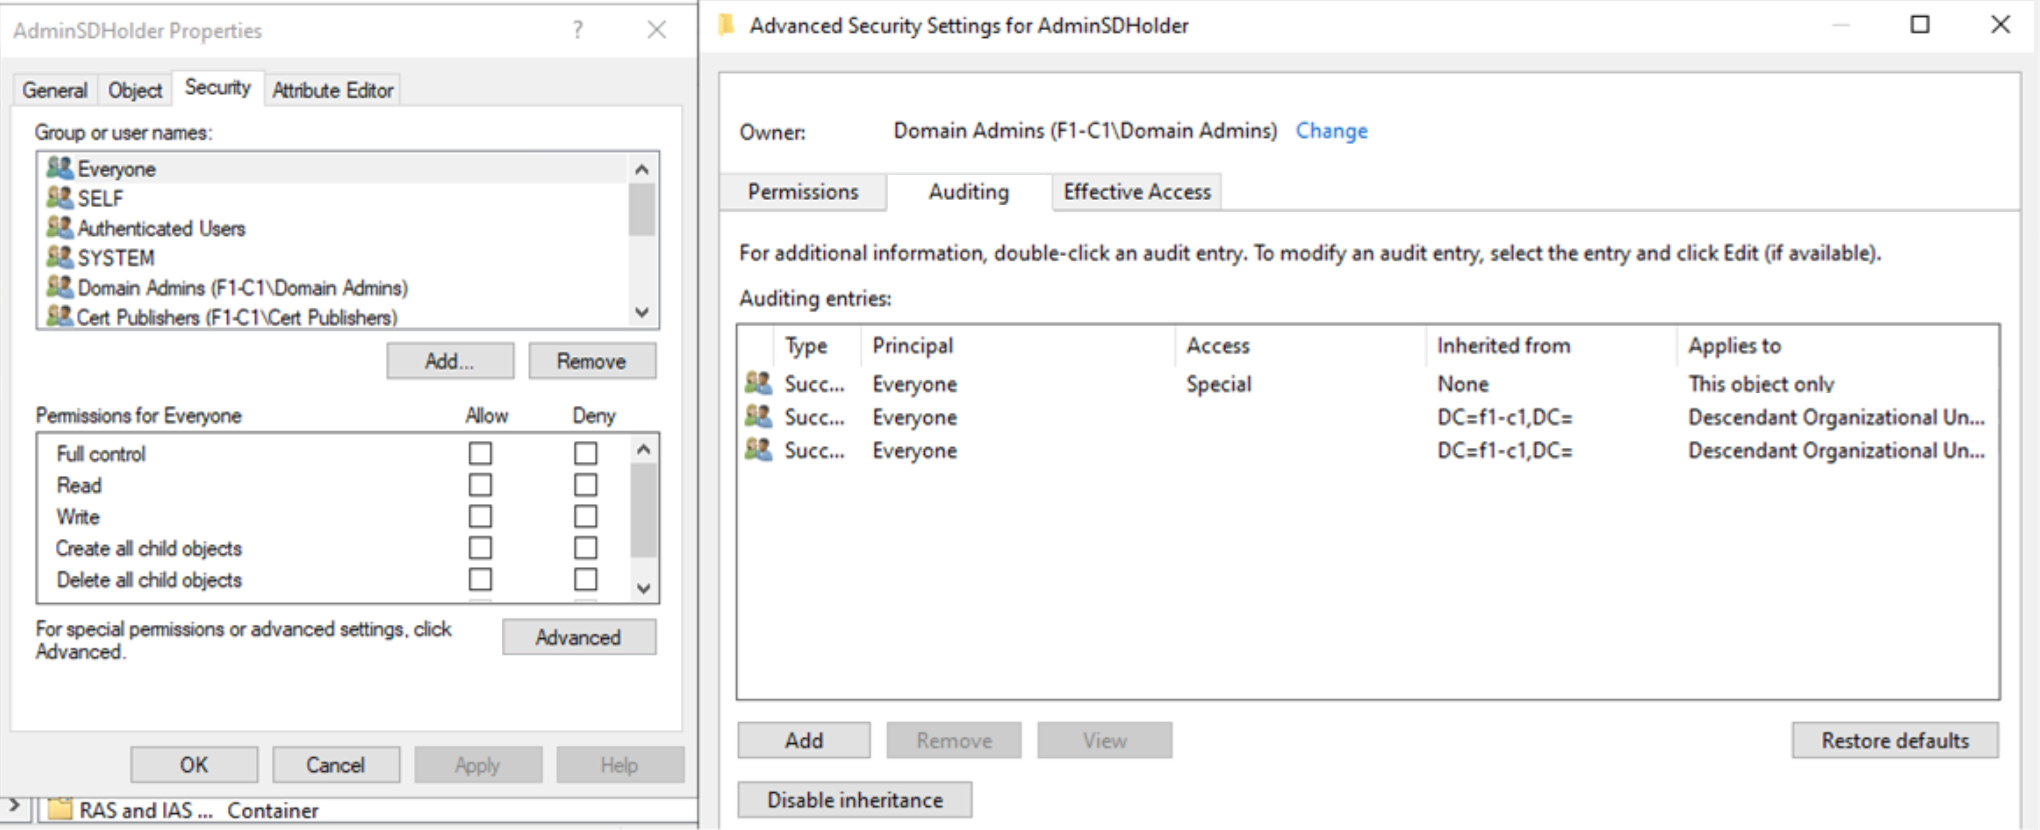 Screenshot of the Advanced Security Settings for AdminSDHolder window showing the Auditing entries on the Auditing tab.